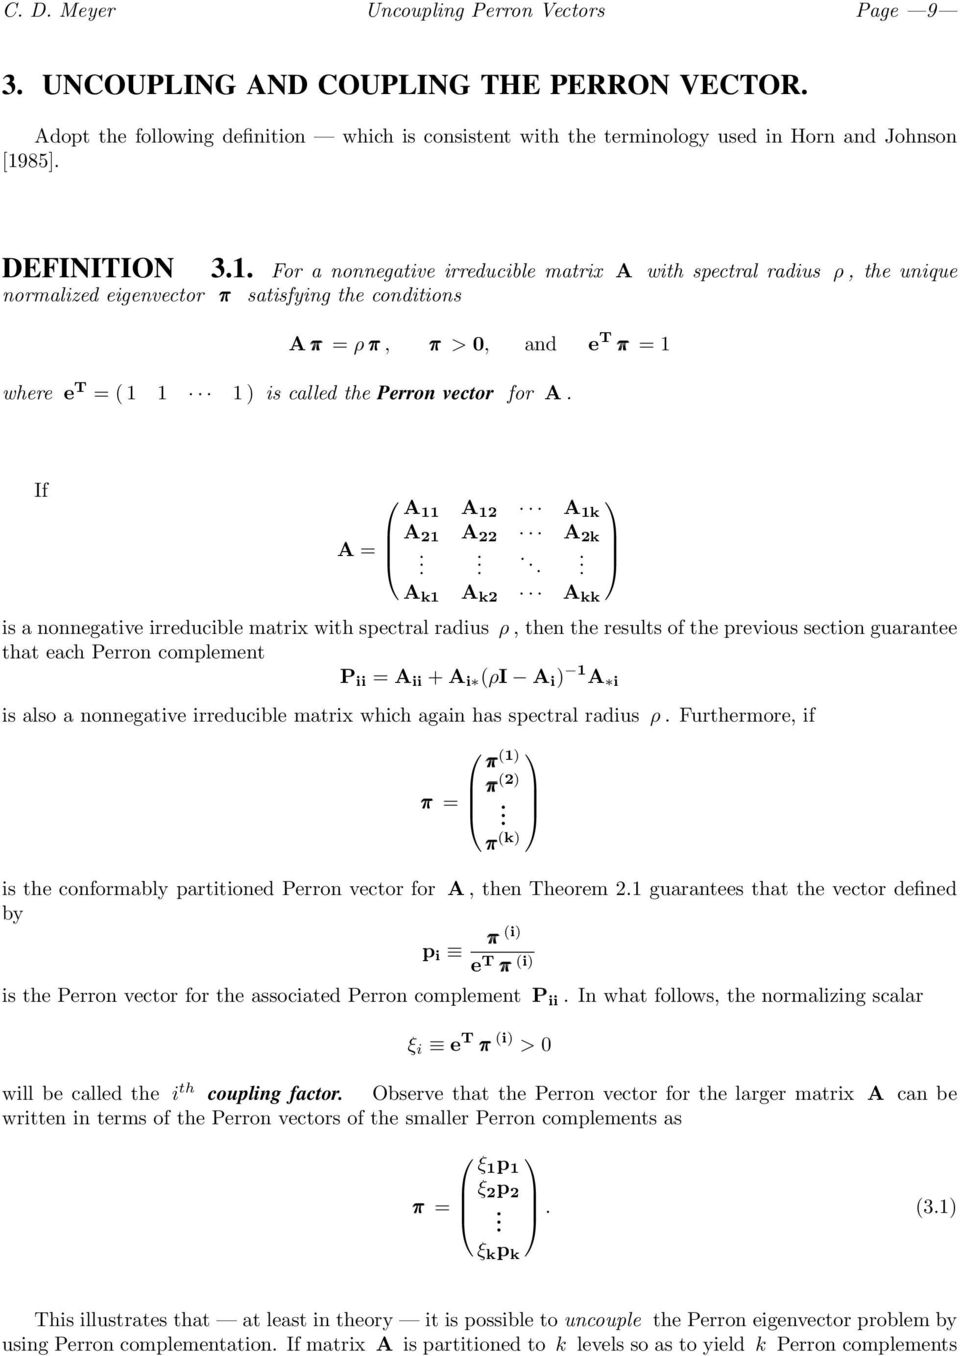 If = 2 22 2k is a nonnegative irreducible matrix with spectral radius ρ, then the results of the previous section guarantee that each Perron complement P ii = ii + i (ρi i ) i is also a nonnegative